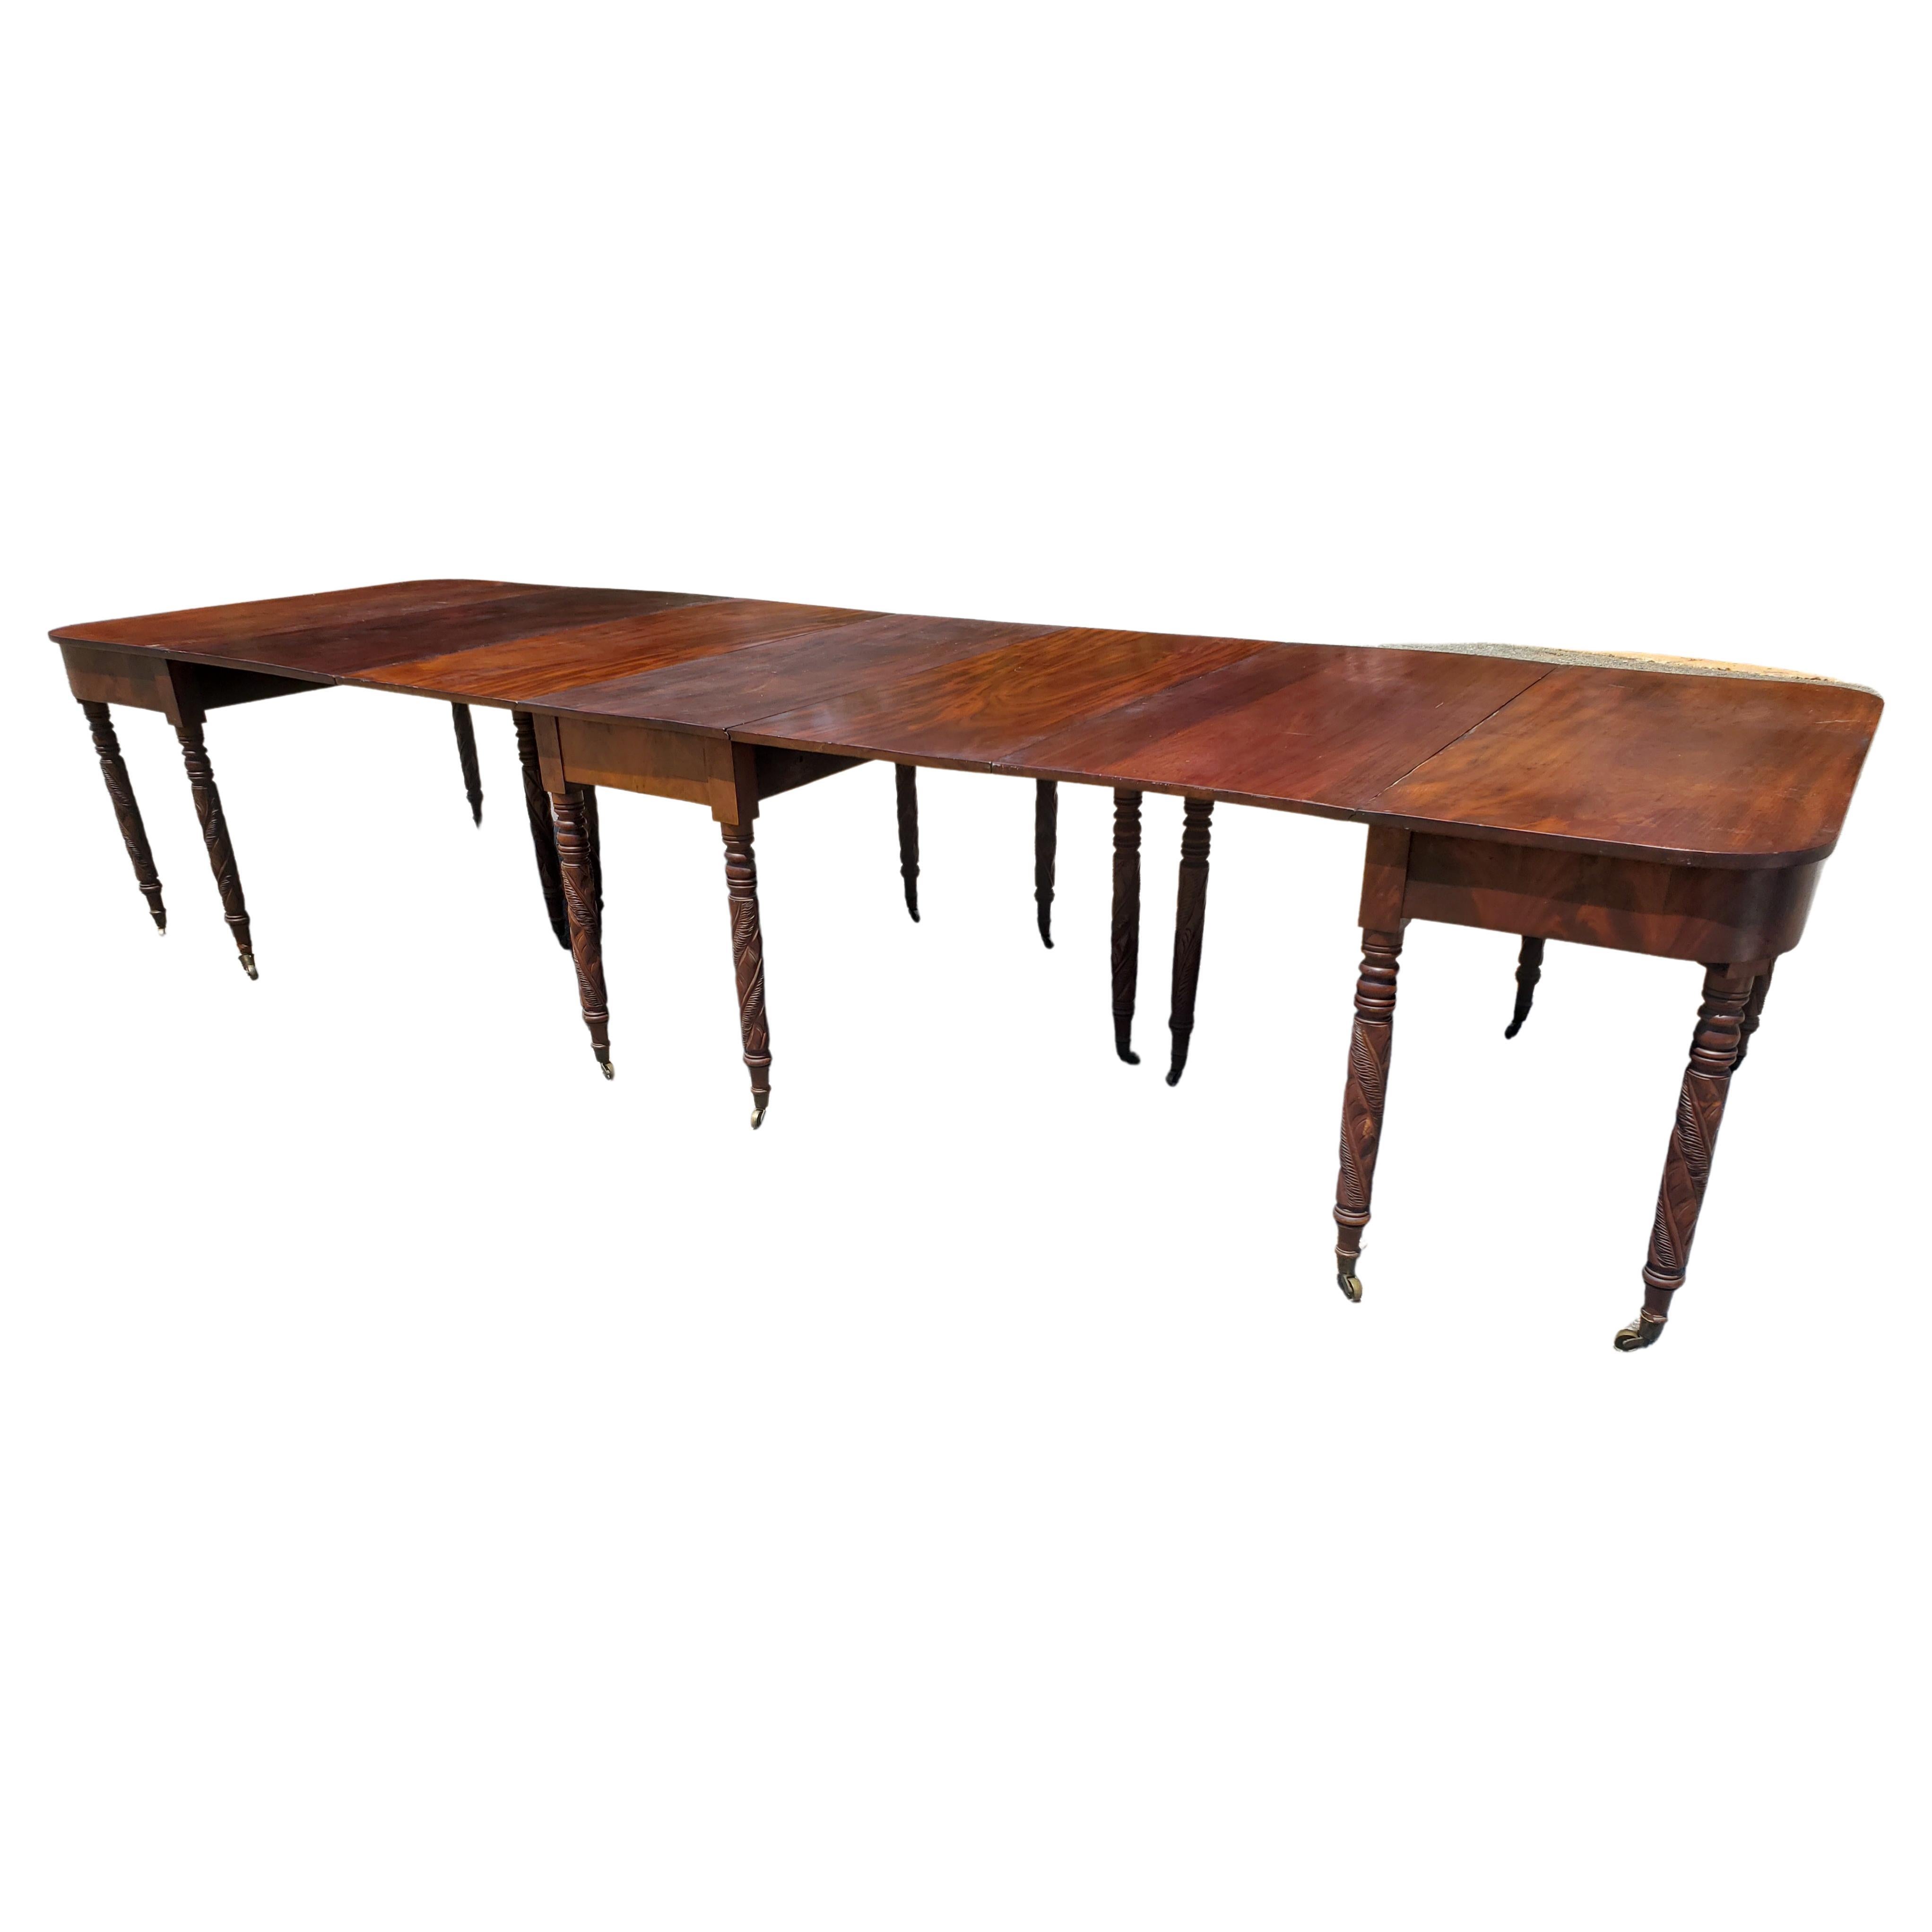 Grand Federal / Hepplewhite Ribbon Mahogany Three-Part Dining Table, 1800s For Sale 9